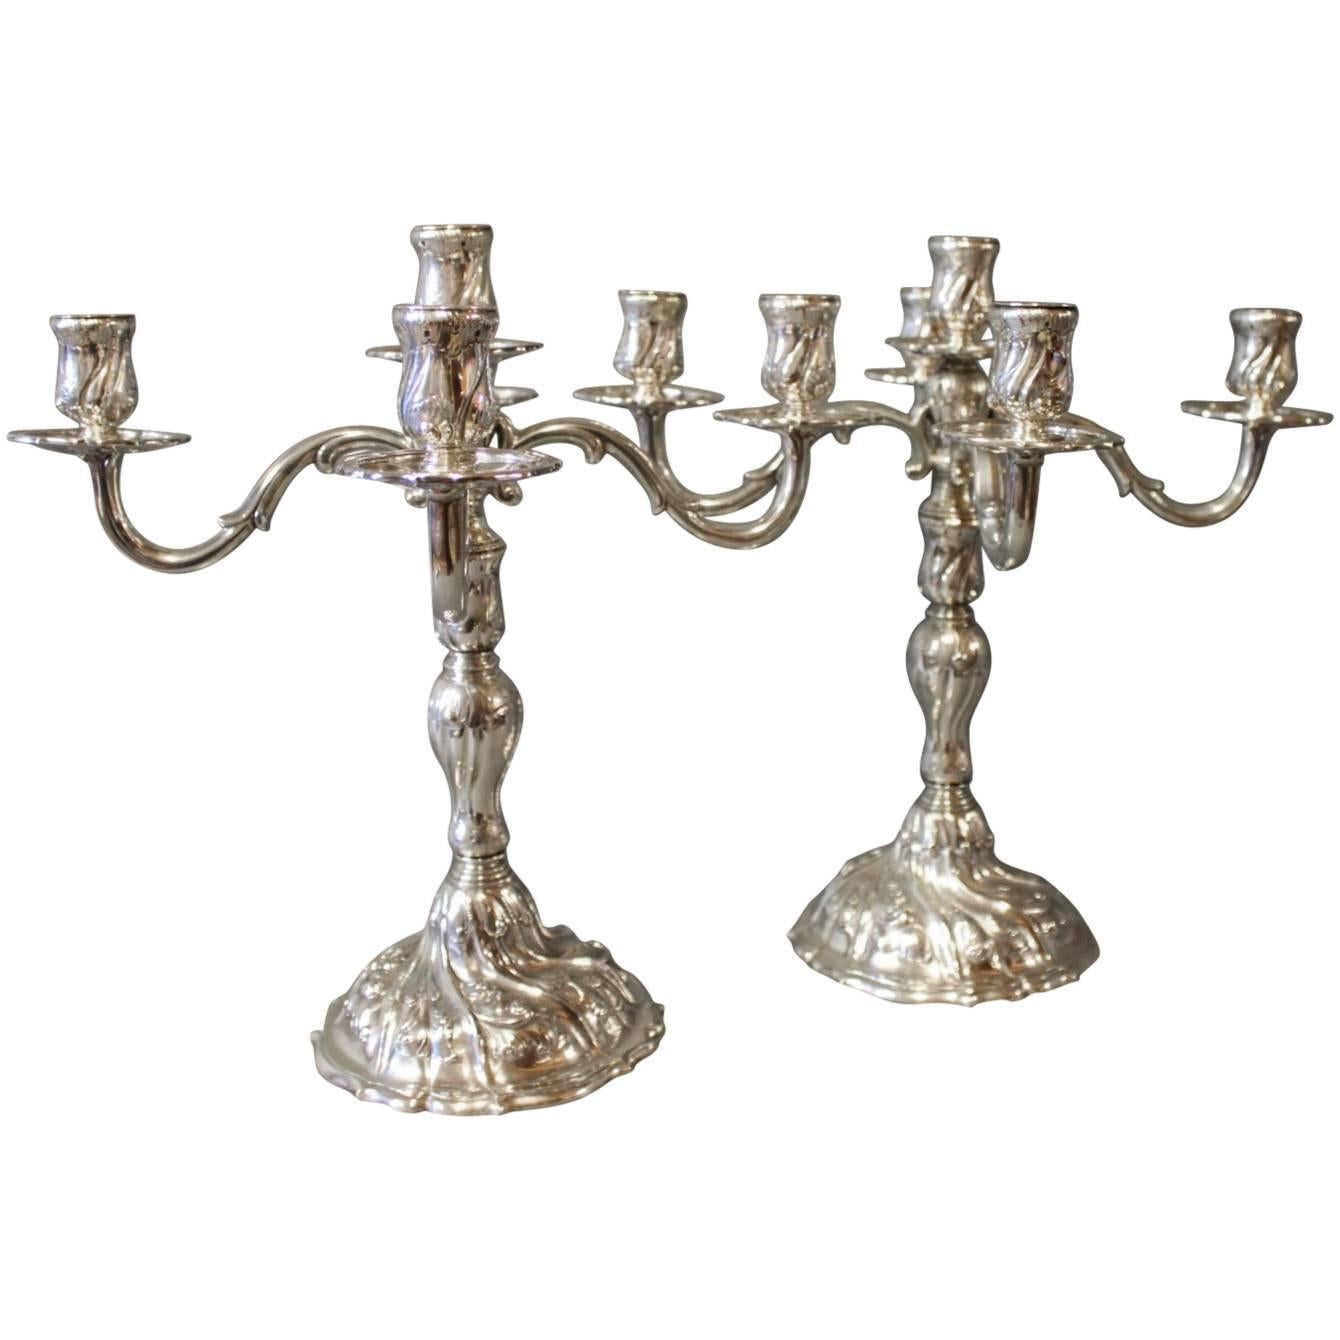 Pair of Five Armed Candelabra in 925 Sterling Silver by English Silver House